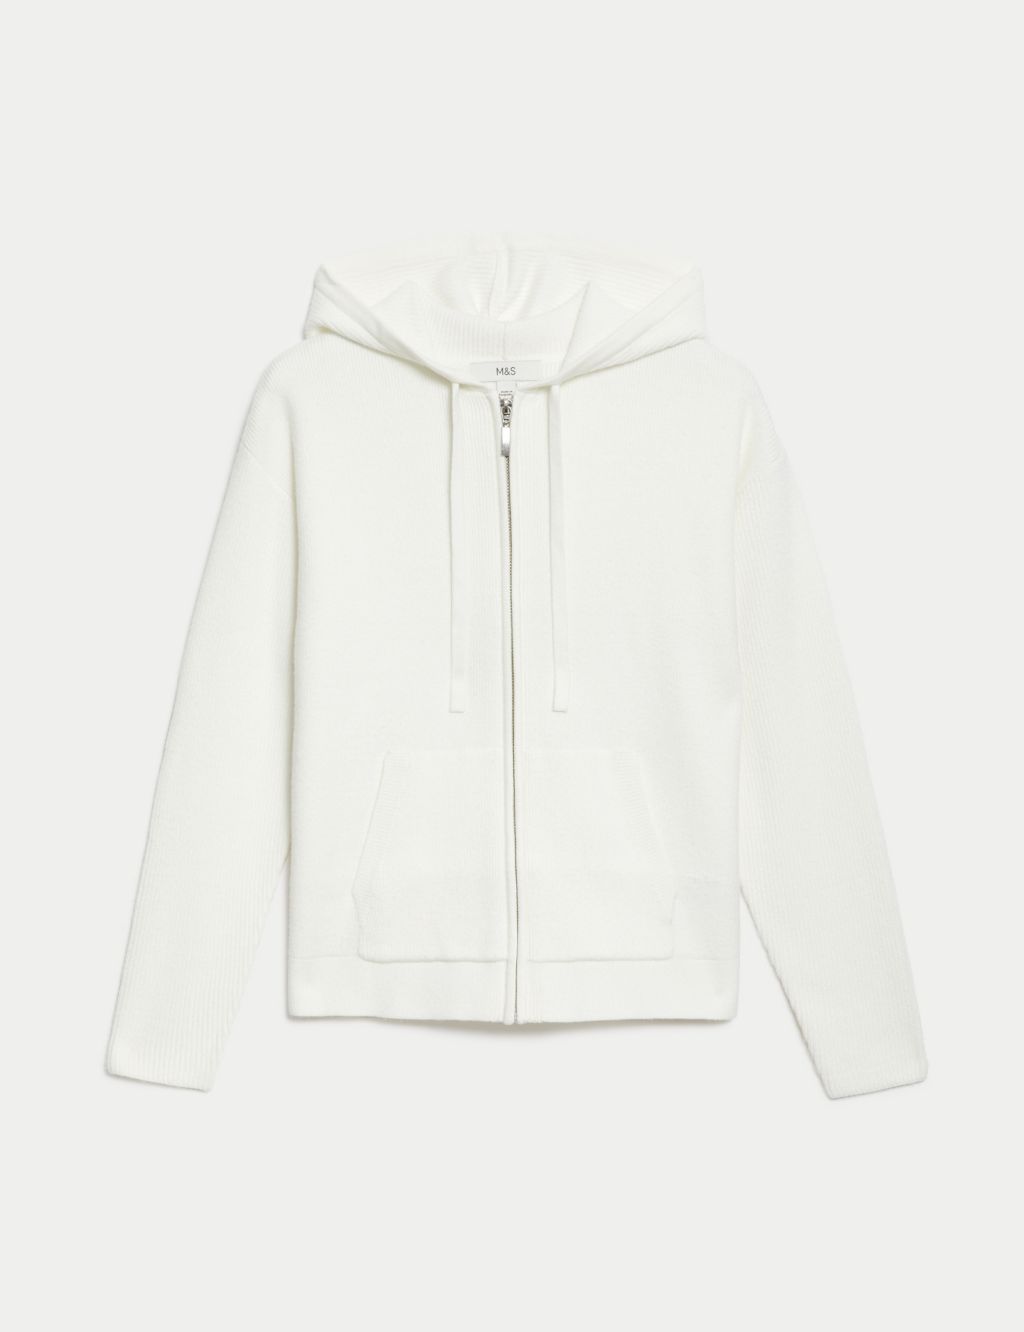 Soft Touch Zip Up Hoodie